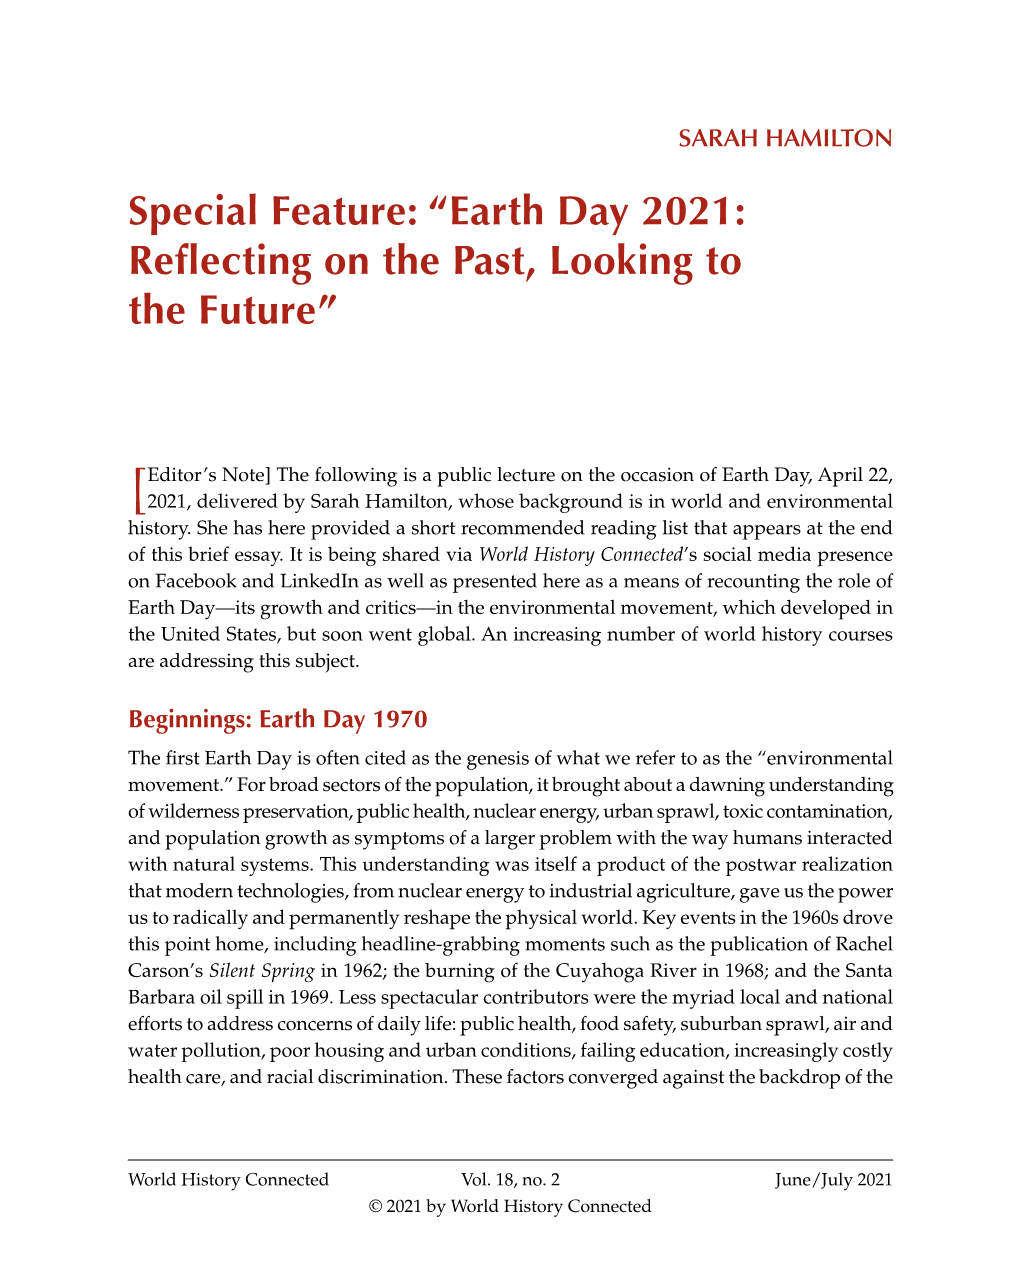 Earth Day 2021: Reflecting on the Past, Looking to the Future”